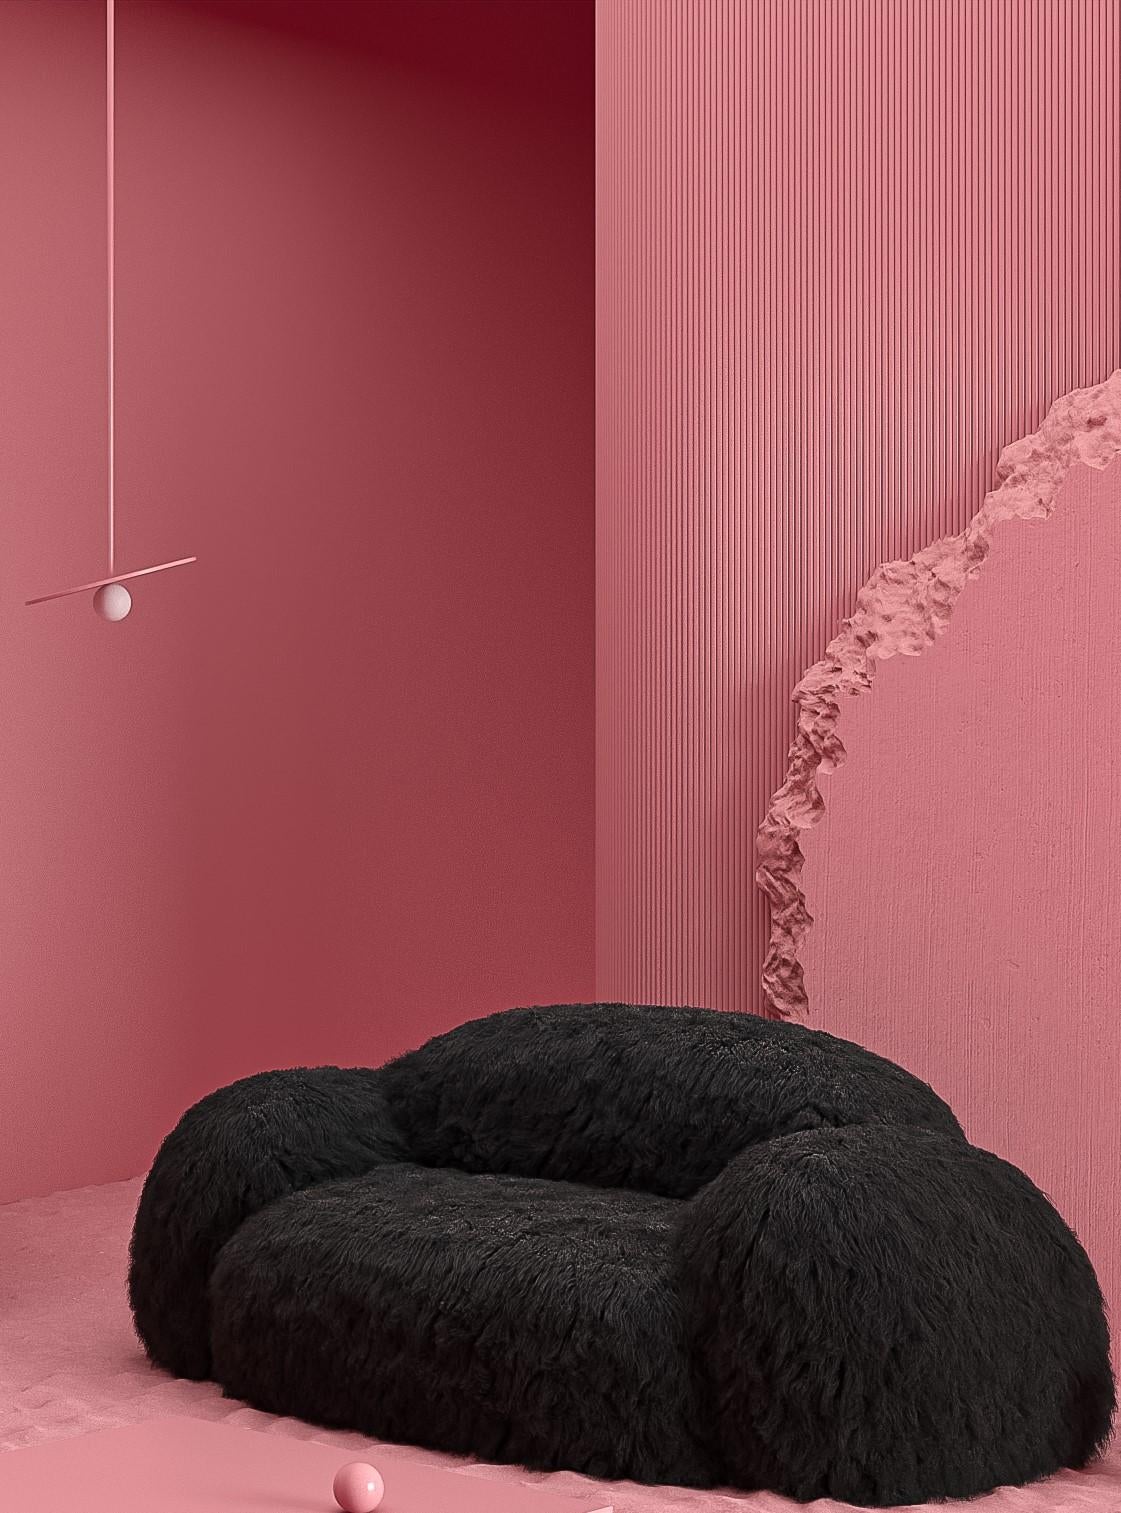 Yeti Sofa by Pepe Albargues 
by Vladimir Naumov
Dimensions: H 82 x W 202 x L 110 cm
Materials: Faux Lama Fur

Yeti furniture series – minimalistic and huge, a soft and cozy pink cloud. Its bloated forms seem to cover you with a feeling of comfort,